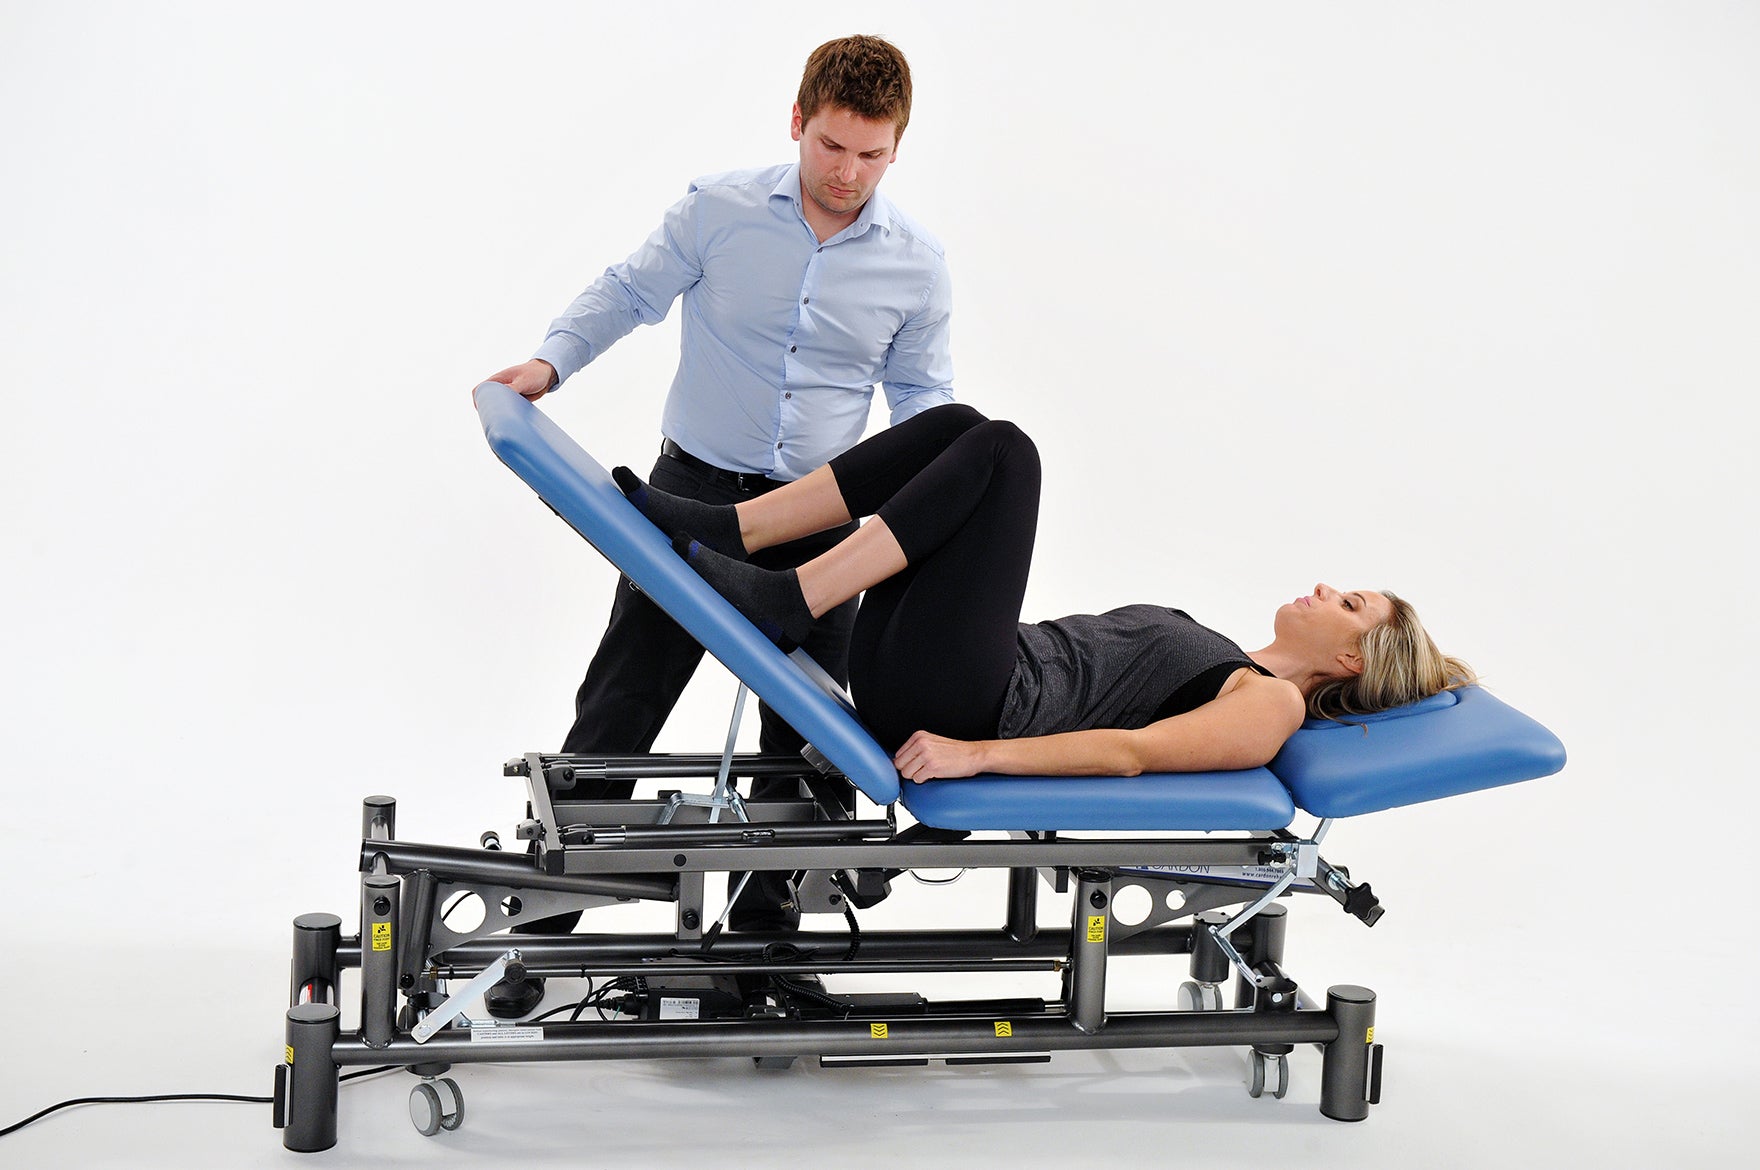 Manual Physical Therapy Table (MPT)